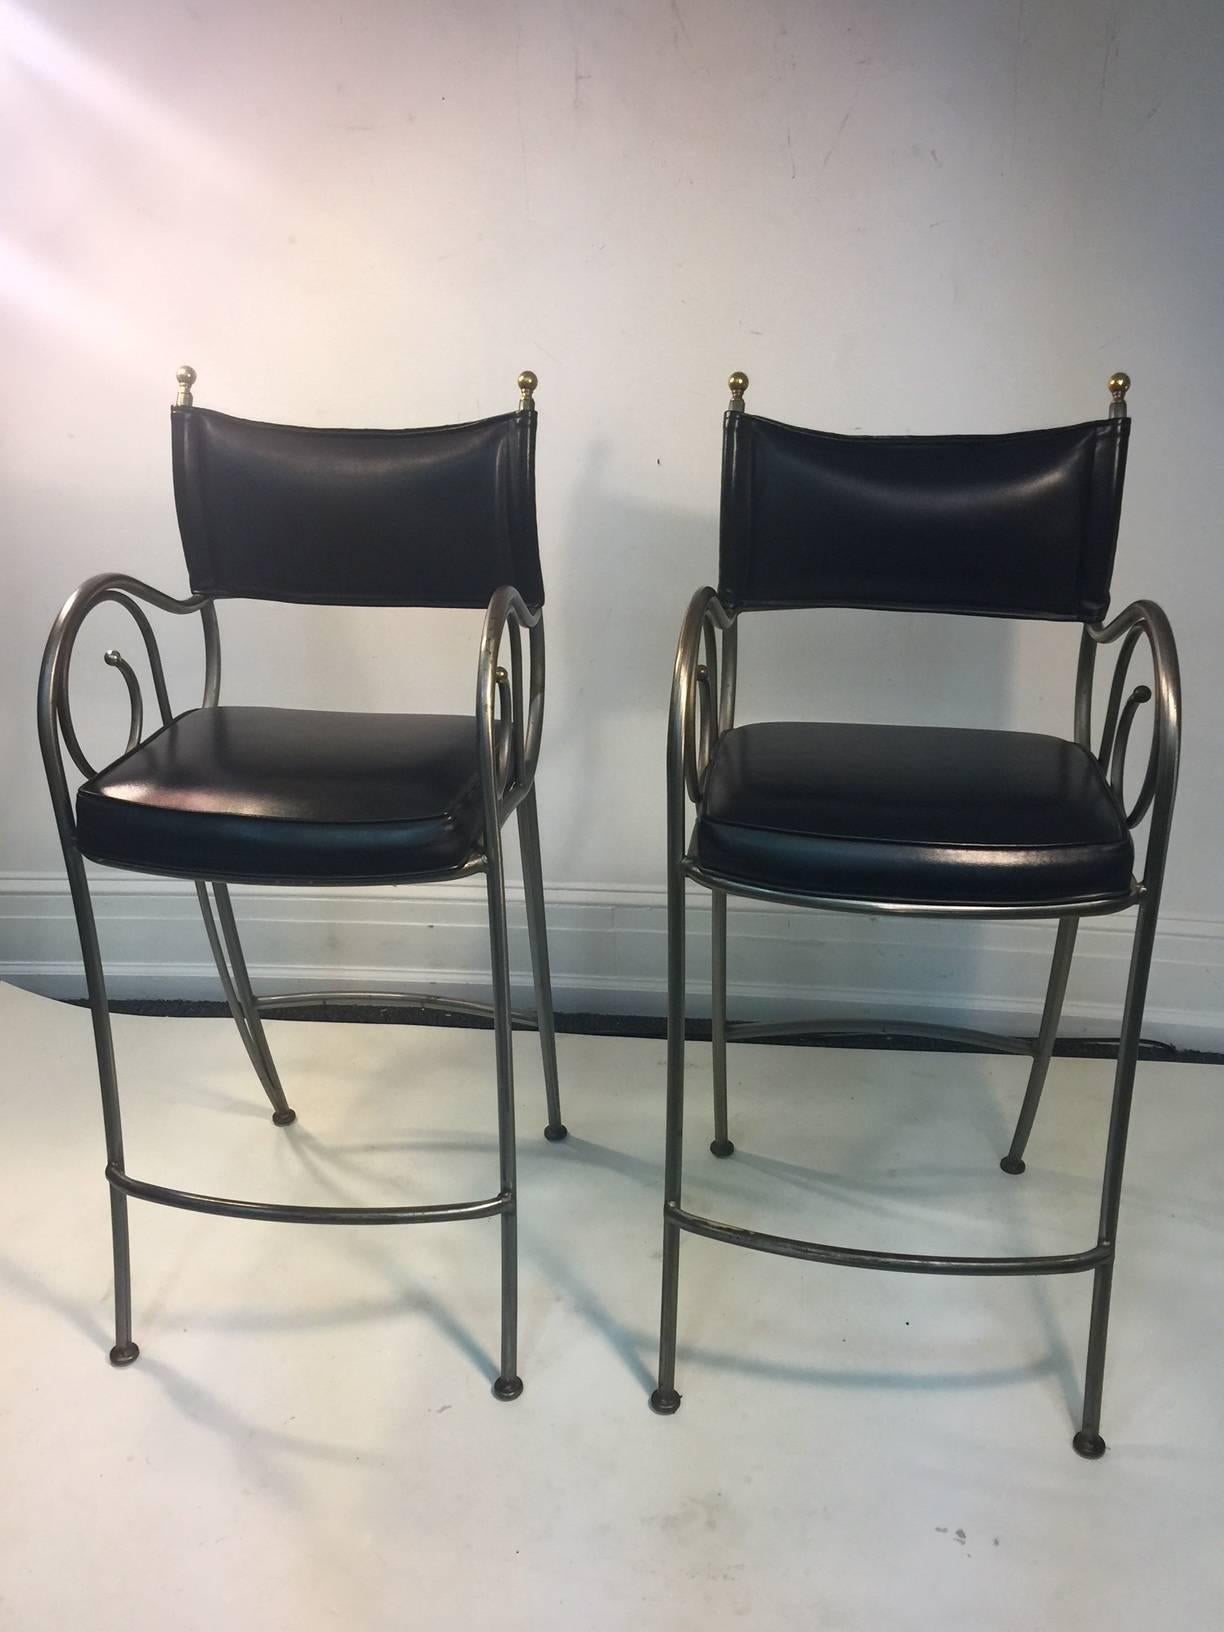 Elegant Pair of High Style Bar Stools with Brushed Curved Tubular Steel Design with Brass  Ball Accents and Black leatherette upholstery Designed in The 1970's..